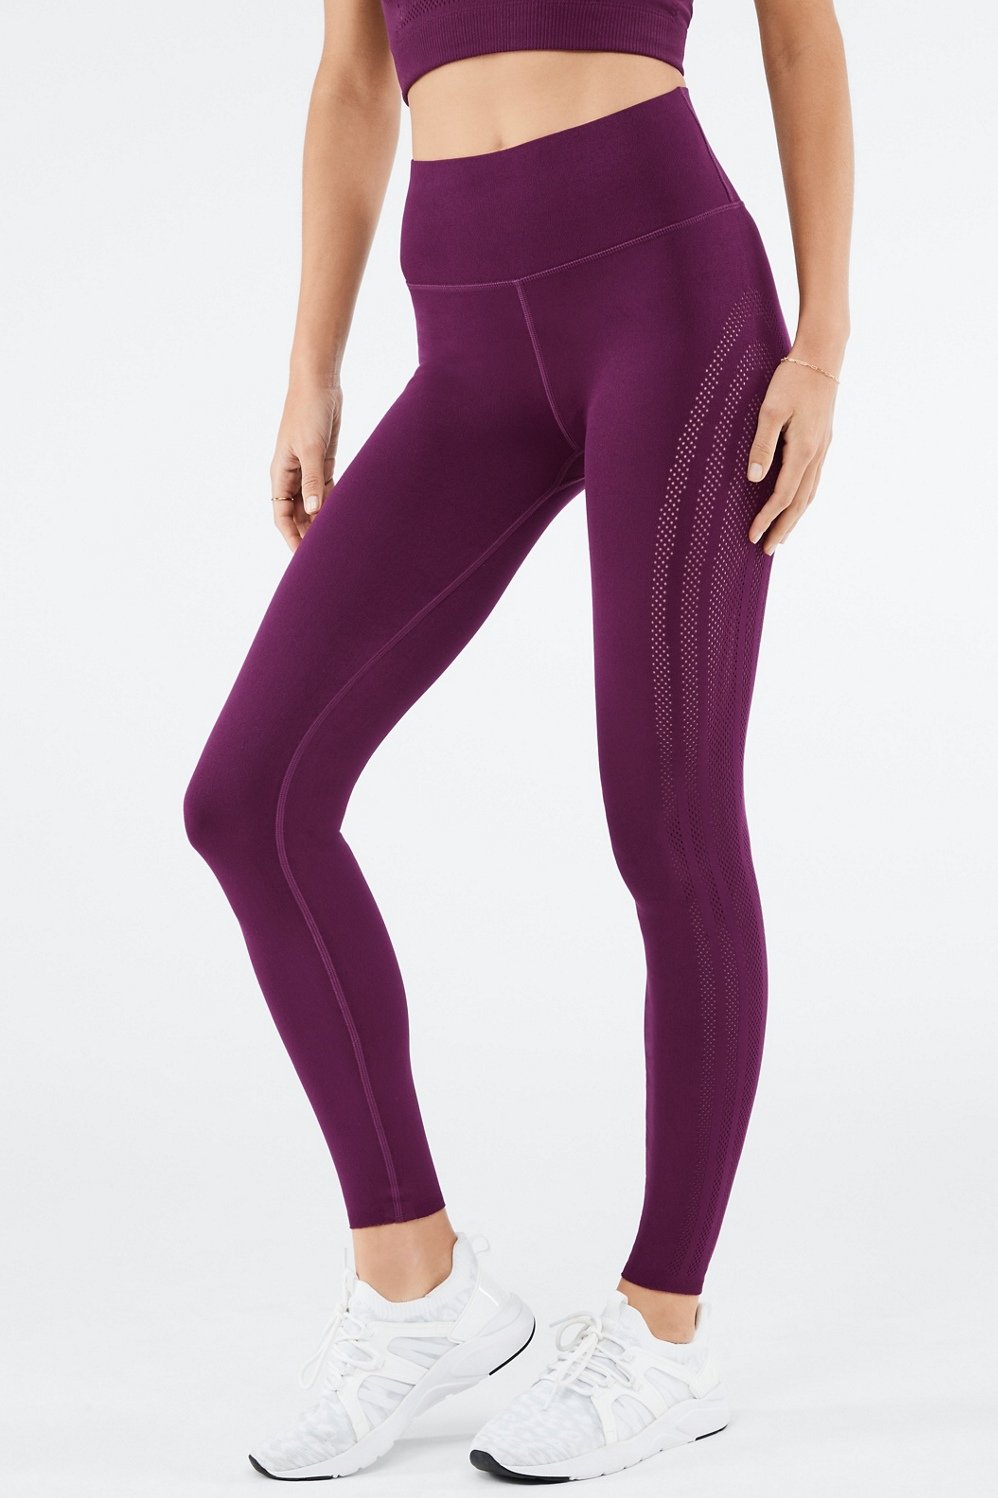 FABLETICS Sculptknit High Waisted Compression Leggings Size Small Regular  Inseam